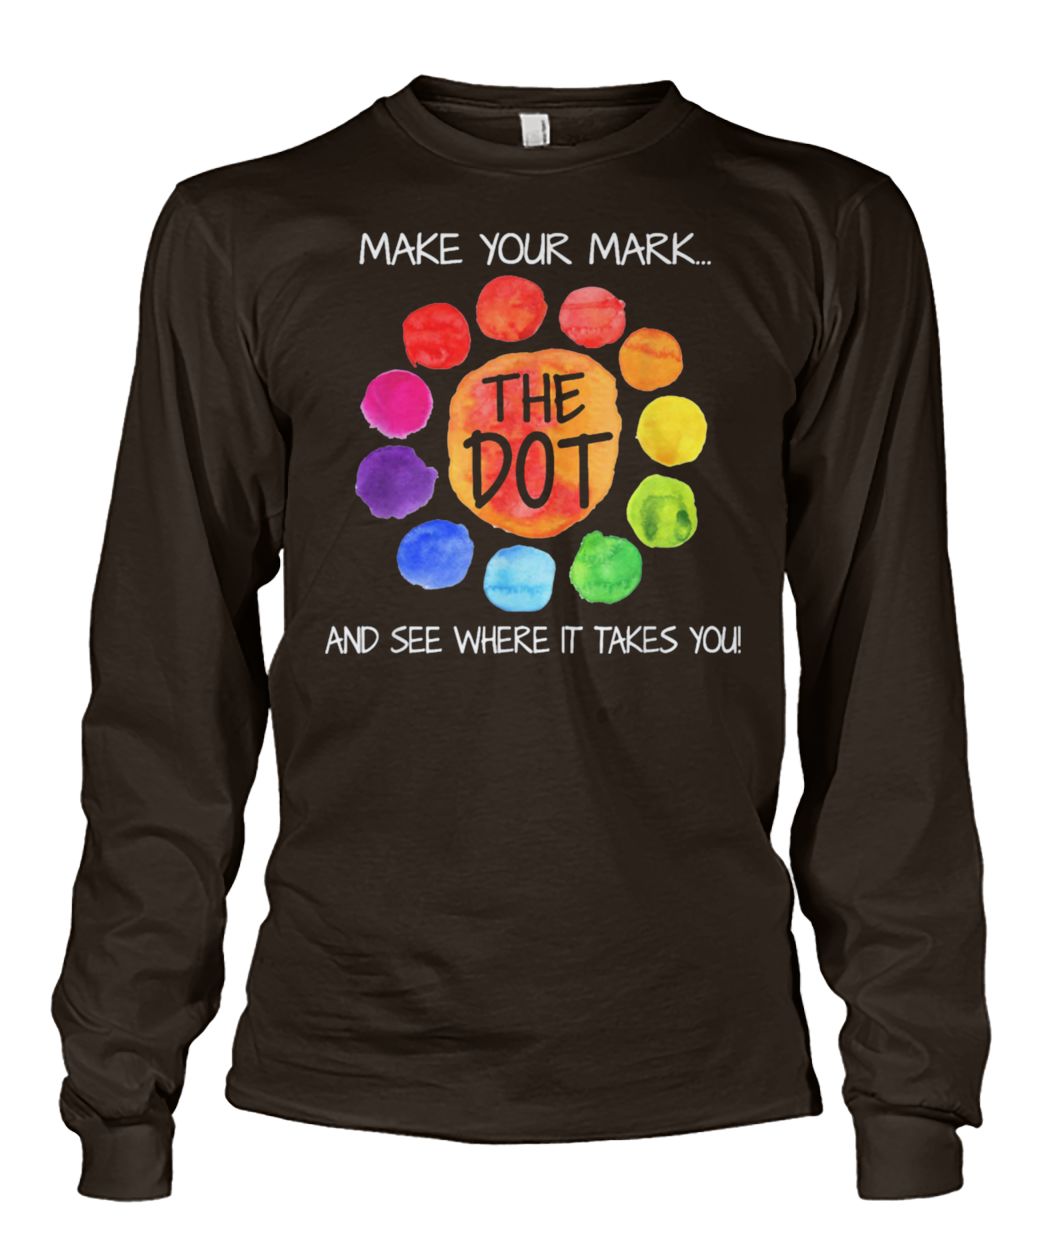 The dot day 2019 make your mark and see where it takes you long sleeve